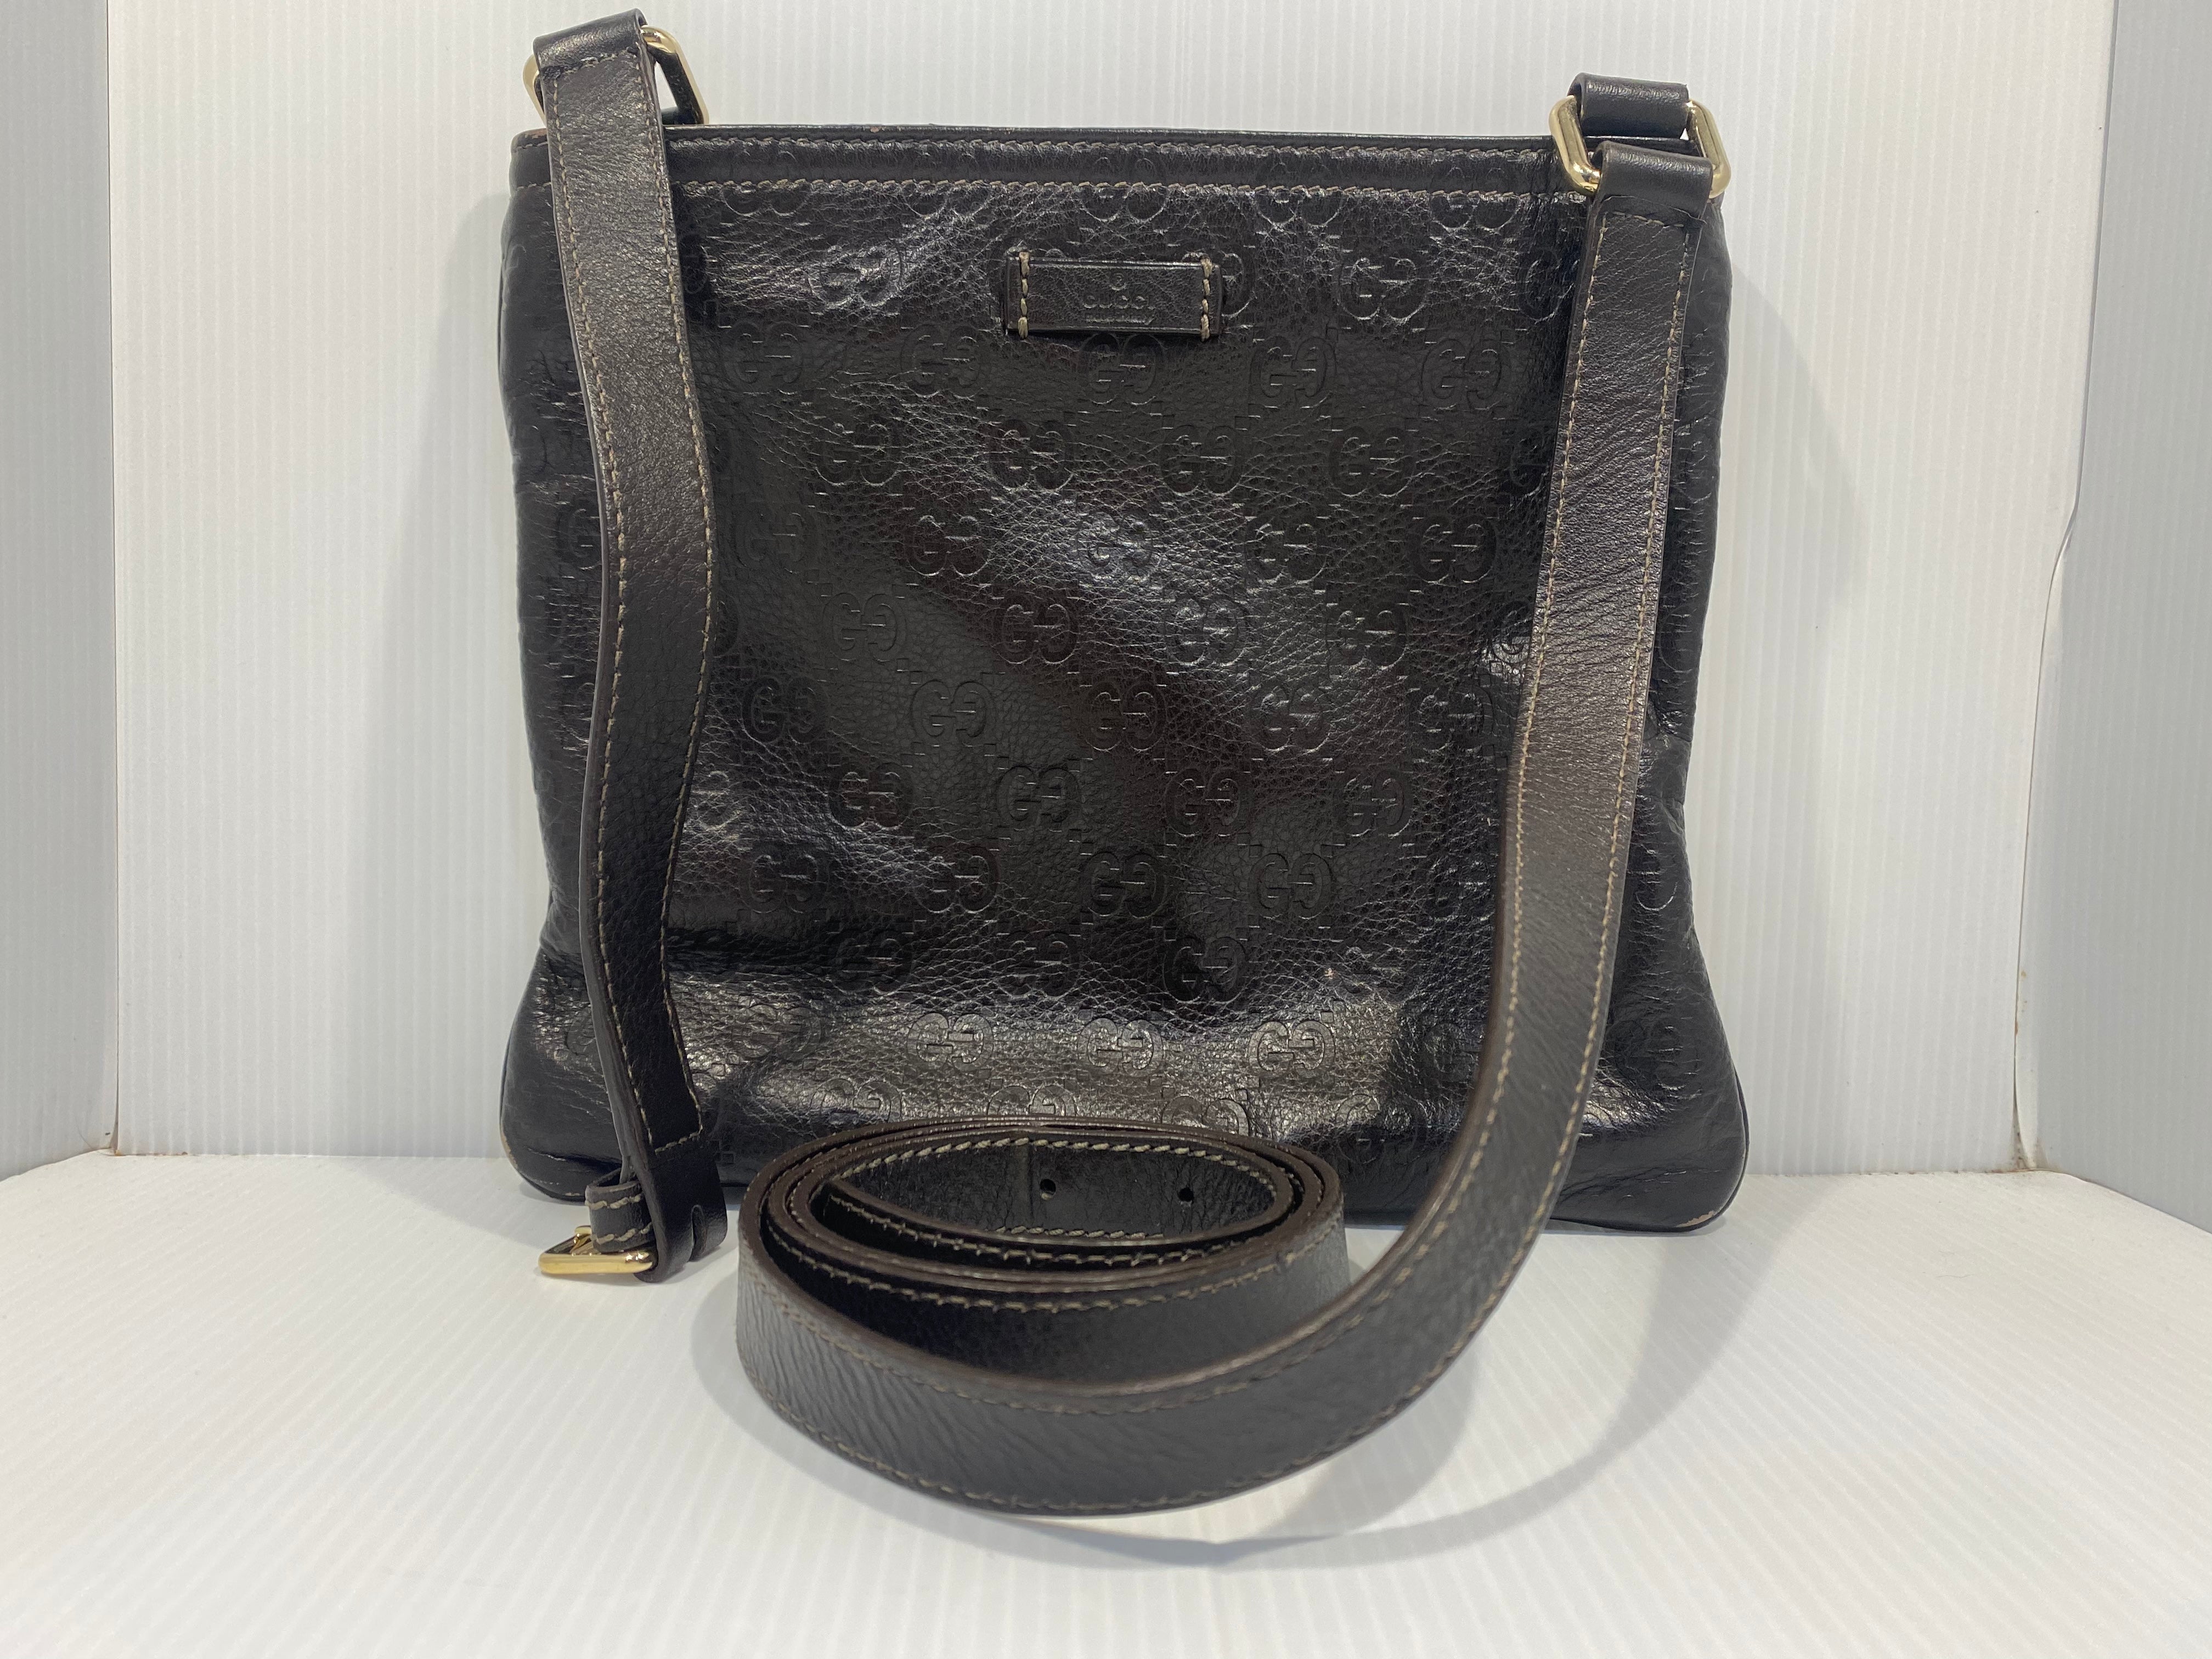 Gucci Pre-Owned GG Pattern Cross Body Shoulder Bag.